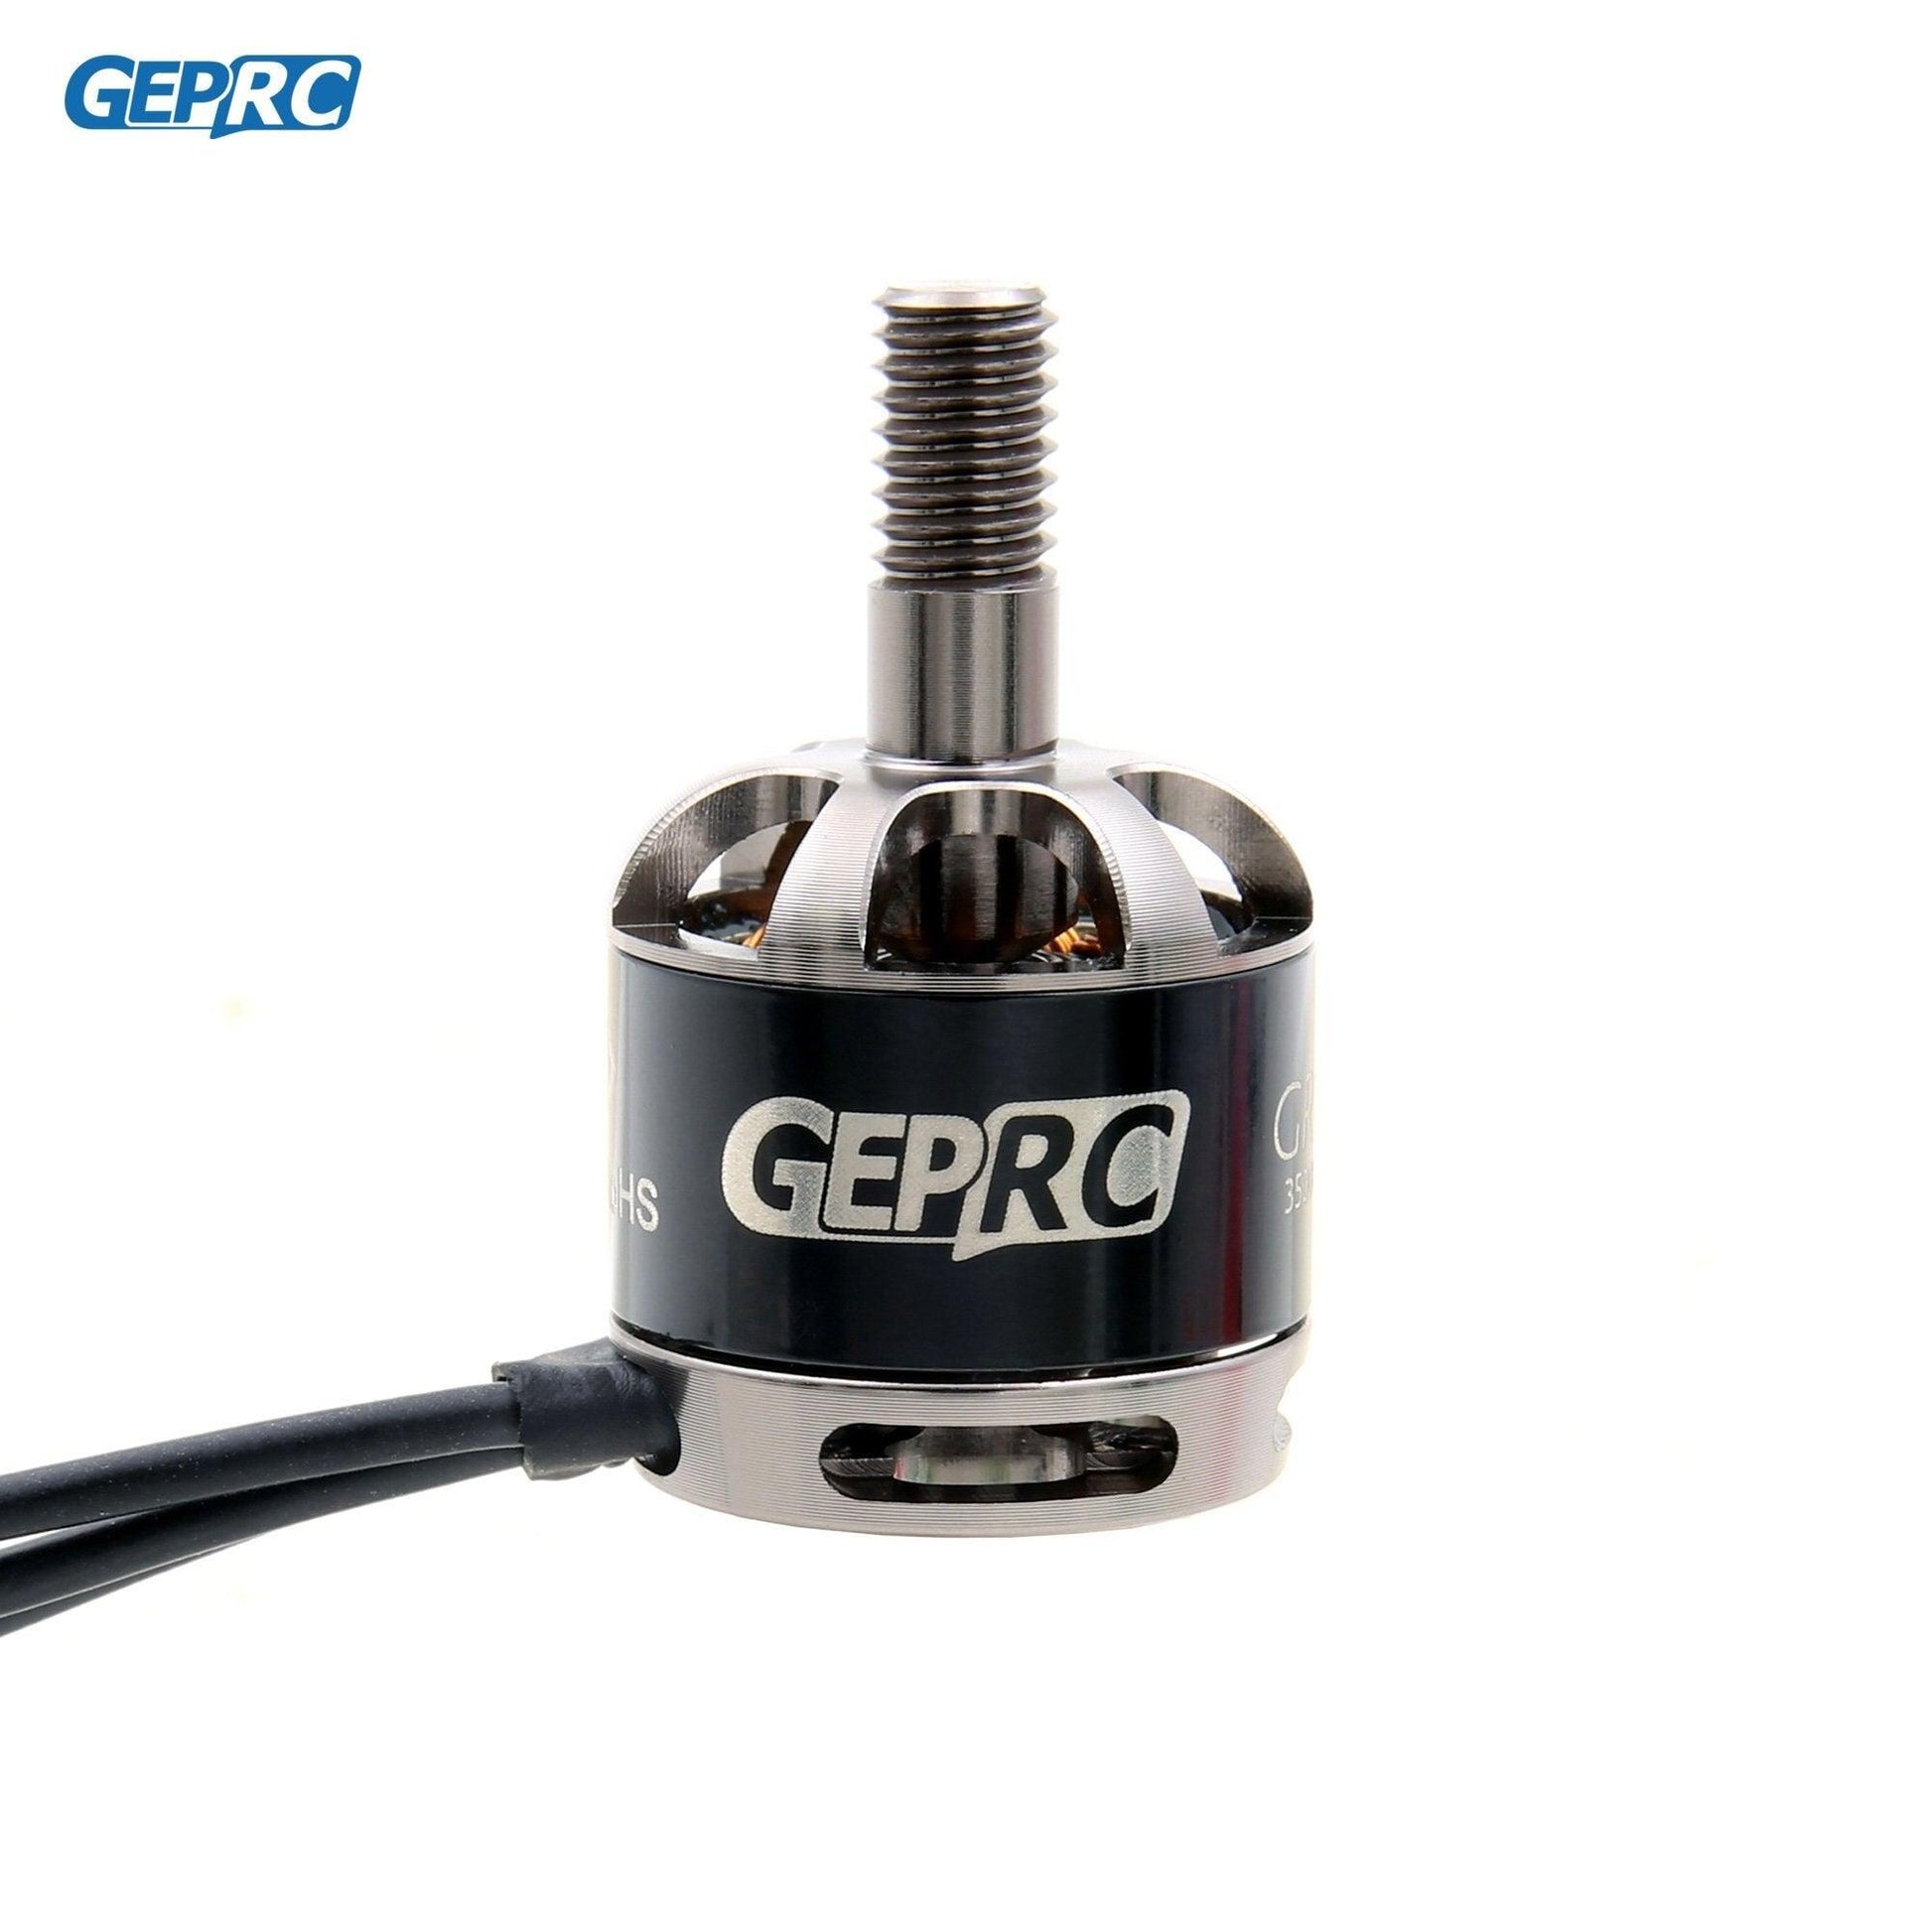 GEPRC GR1408 3500KV Motor - Suitable For DIY RC FPV Quadcopter Racing Drone Accessories Replacement Parts - RCDrone